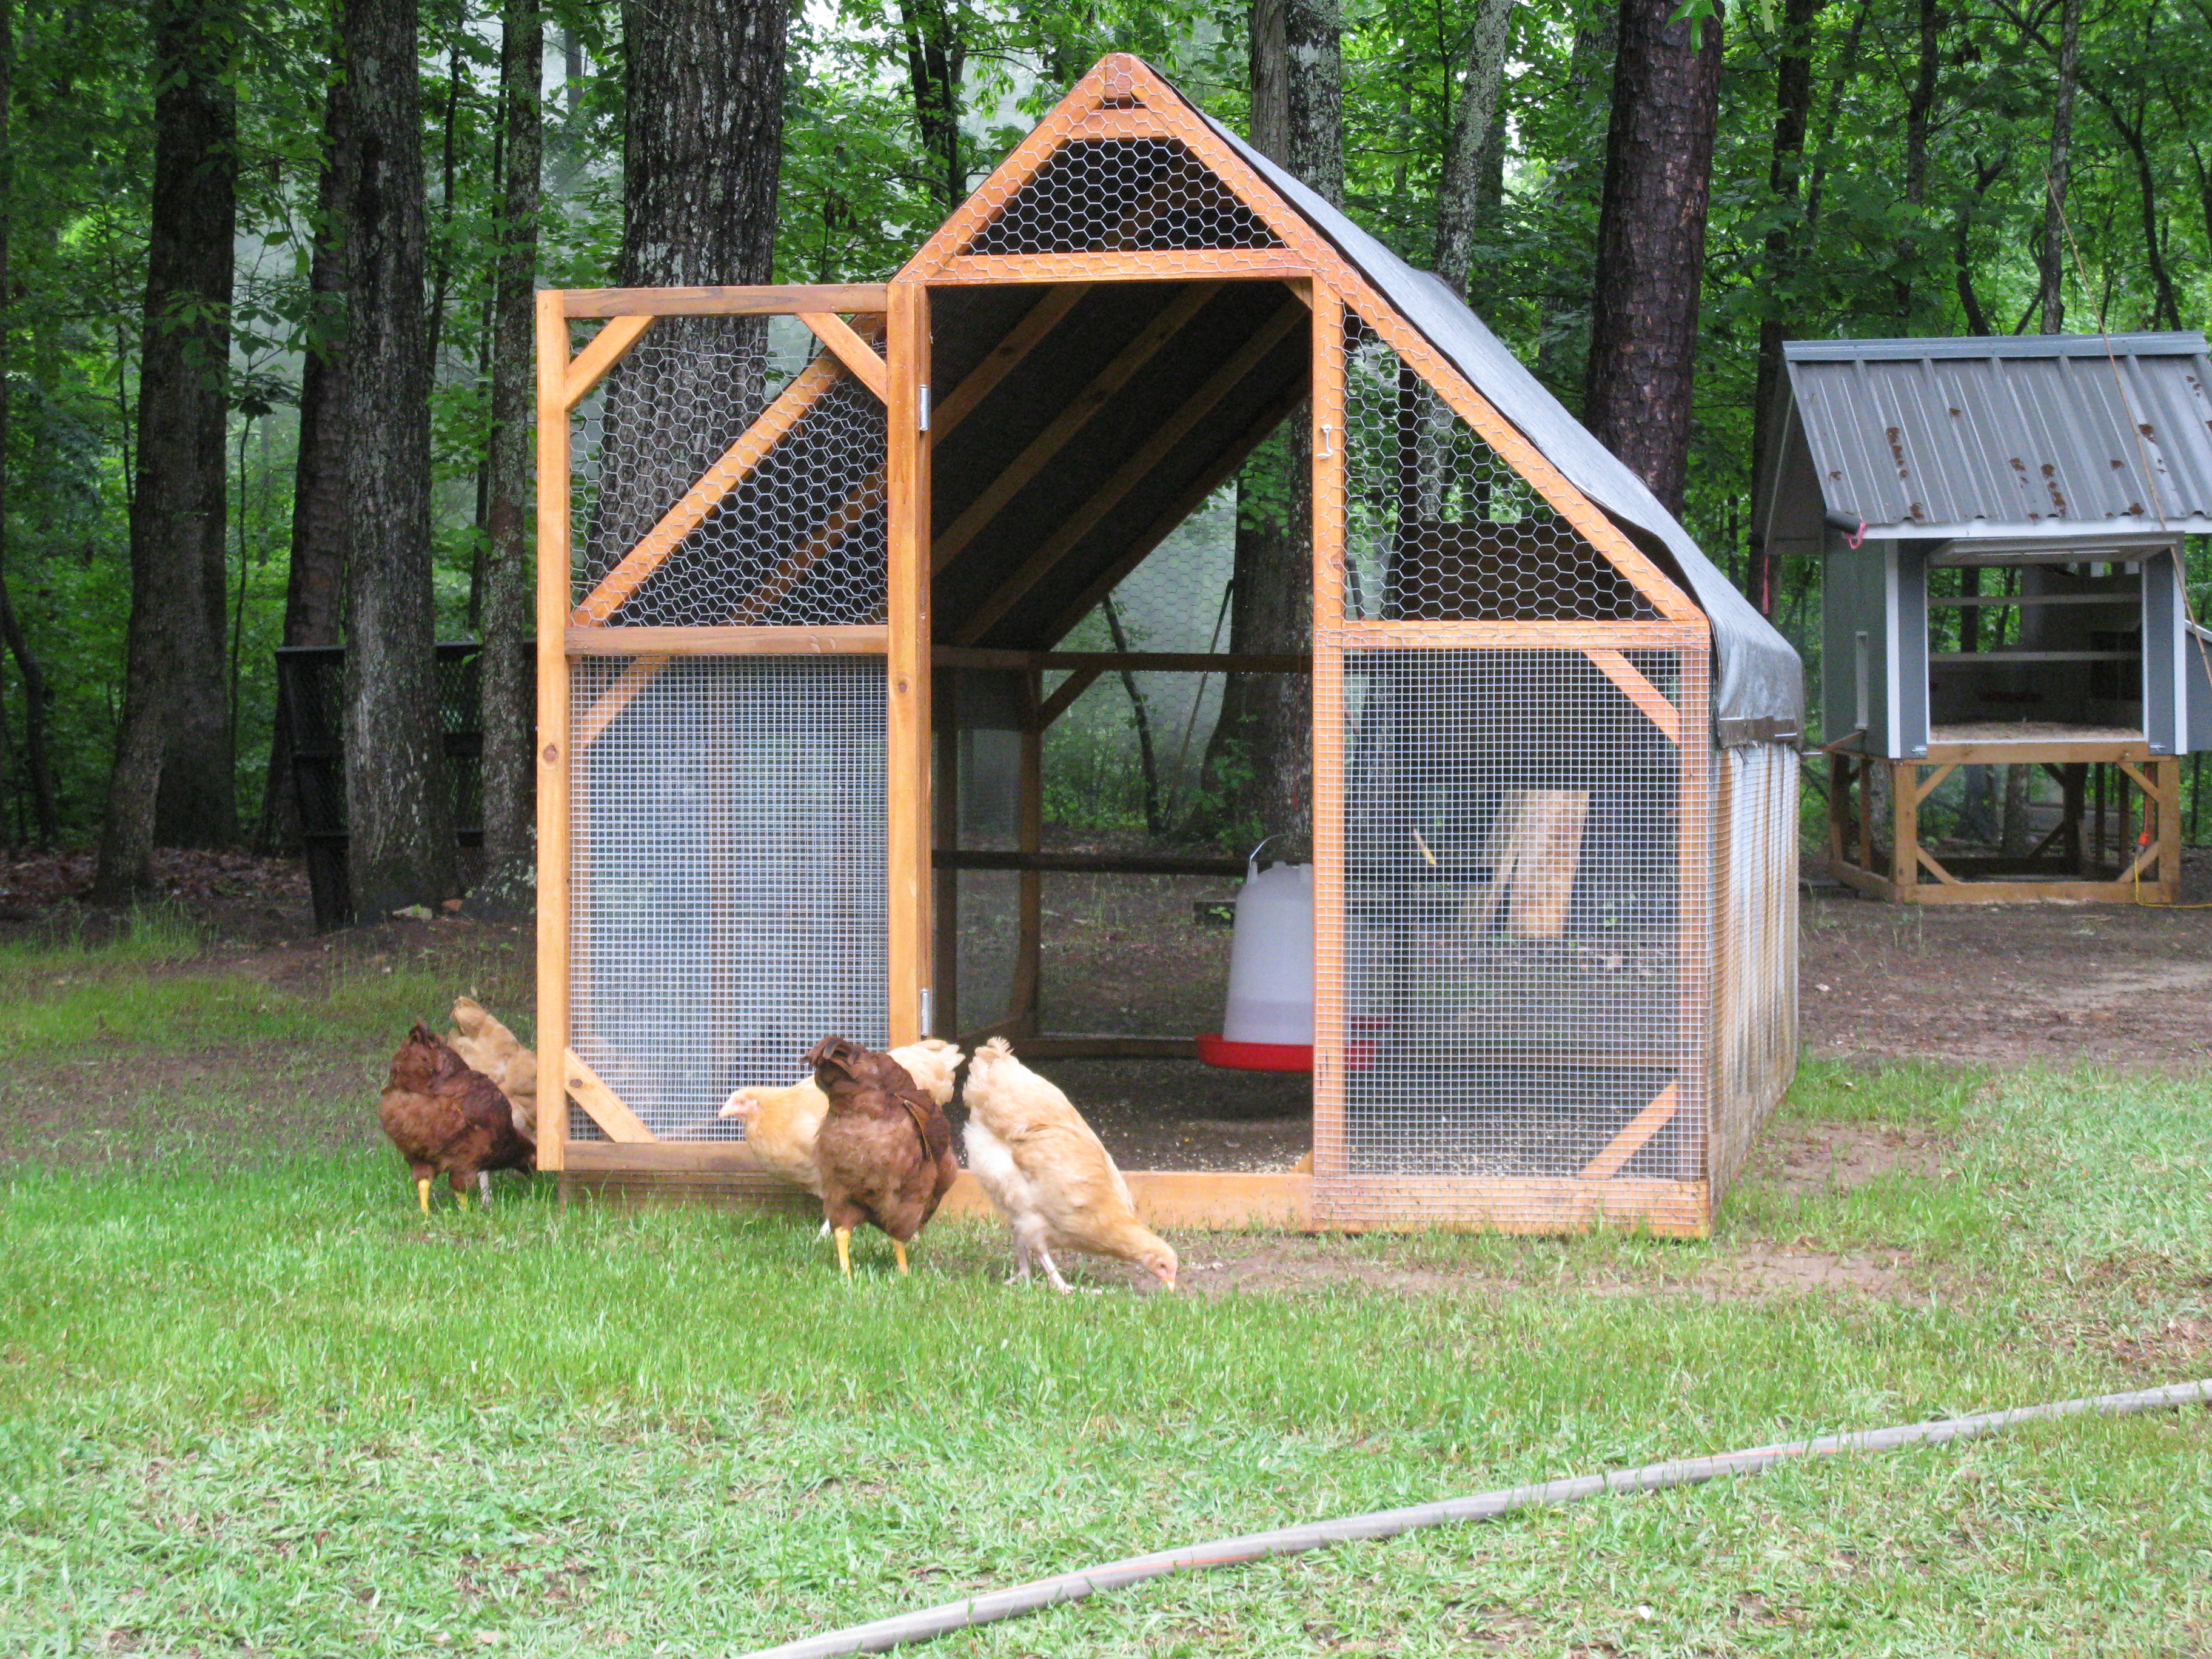 First day free ranging for the girls.  I later coupled the run up to the coop located in the background.